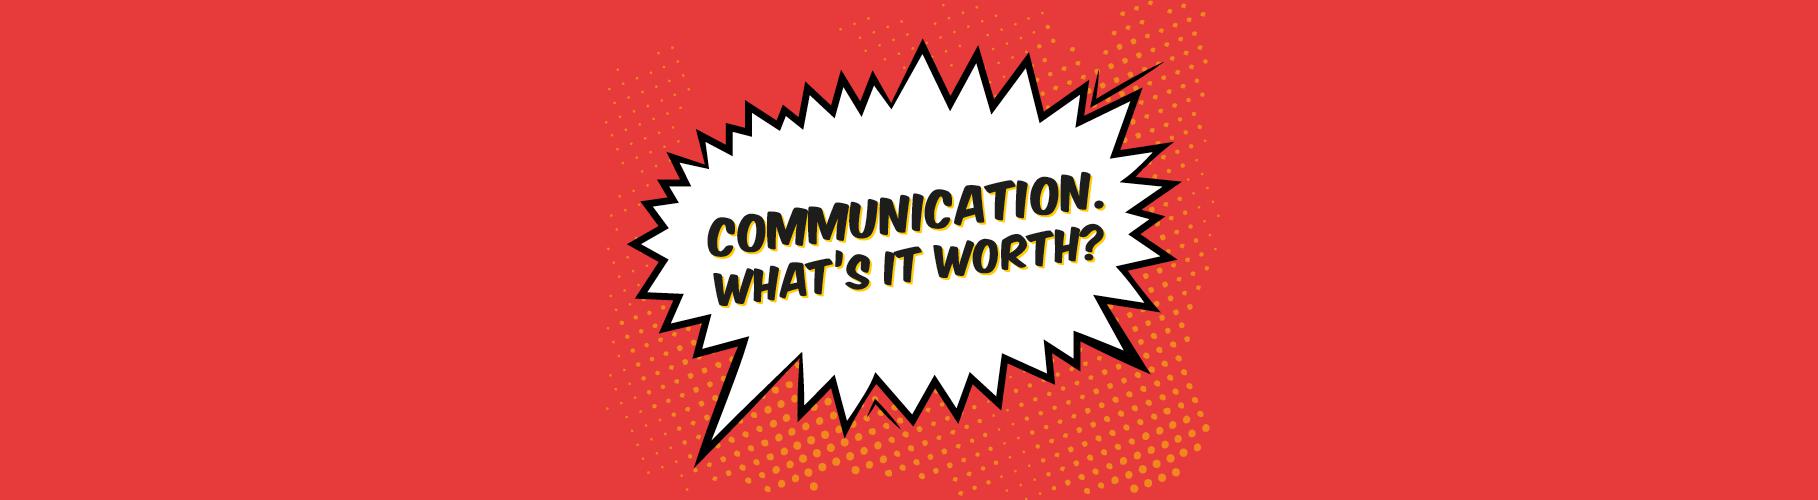 TopIC Banner - Communication. What‘s it worth?